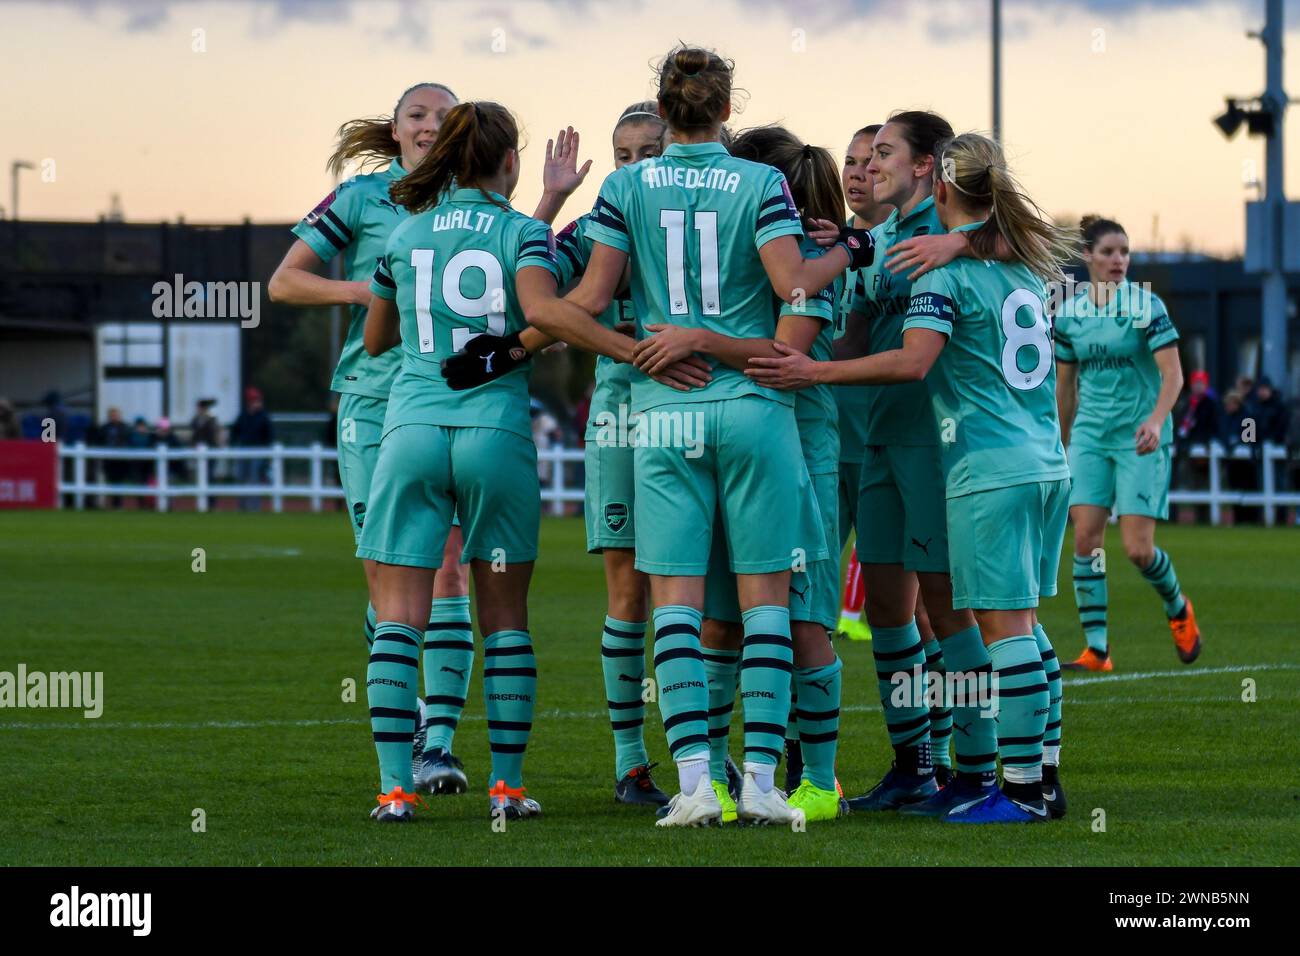 Bristol, England. 28 October 2018. Arsenal players celebrate their side's fourth goal during the FA Women's Super League game between Bristol City and Arsenal at Stoke Gifford Stadium in Bristol, England, UK on 28 October 2018. Credit: Duncan Thomas/Majestic Media. Stock Photo